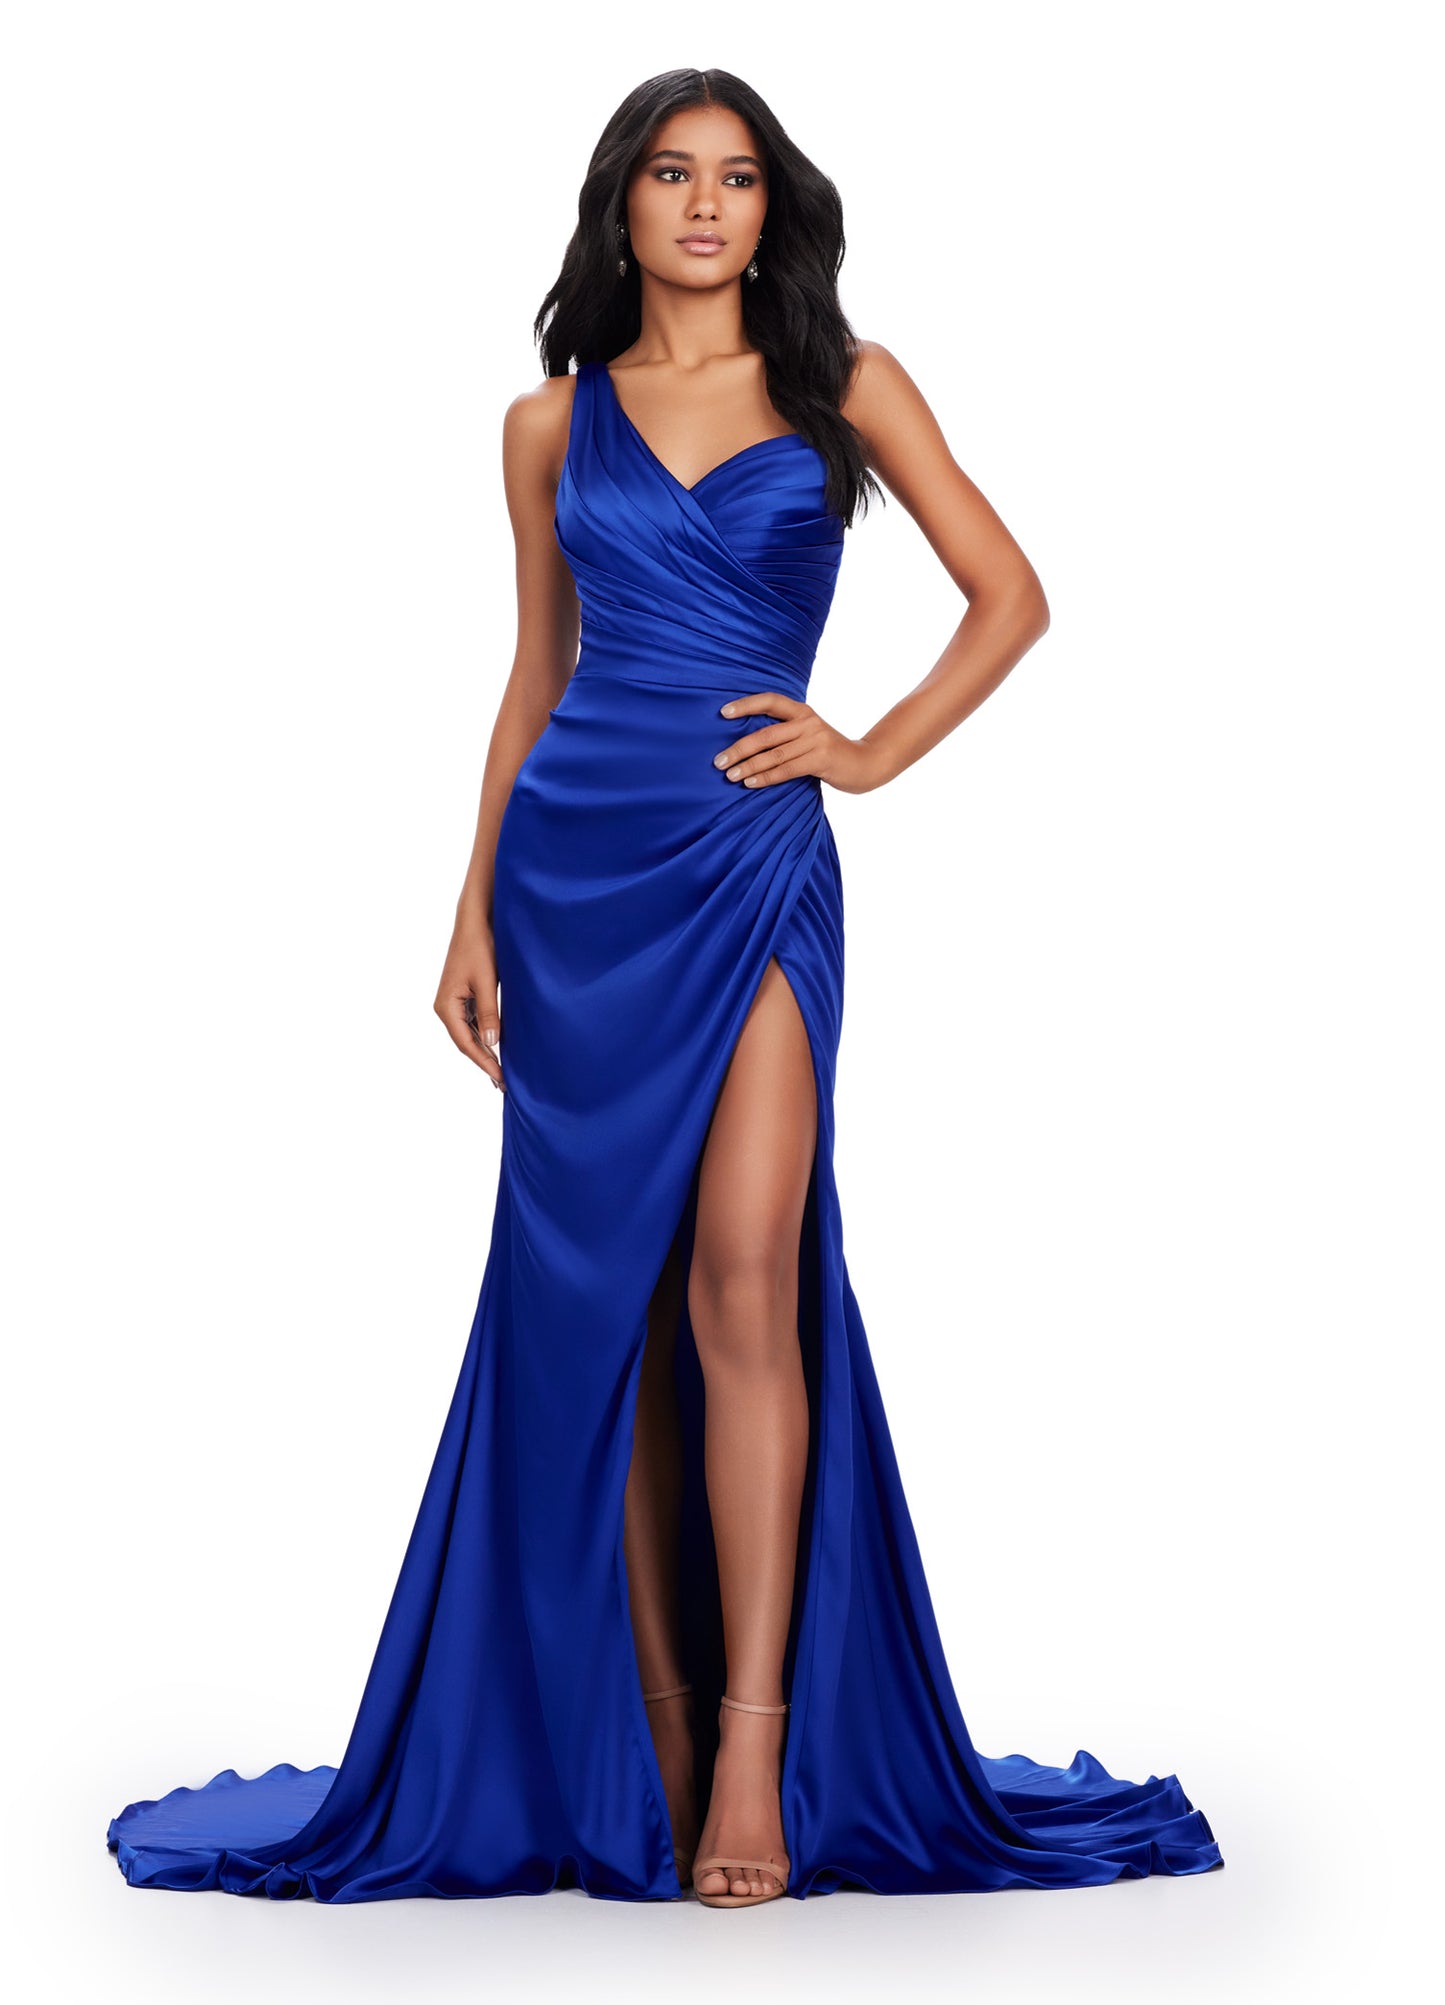 Look stunning in the Ashley Lauren 11574 Long Prom Dress. This one shoulder gown features a draped satin design and a left leg slit, perfect for formal events and pageants. Elevate your style with this elegant and sophisticated gown. Classic and glamorous! This one shoulder satin gown features a draped design and a left leg slit.